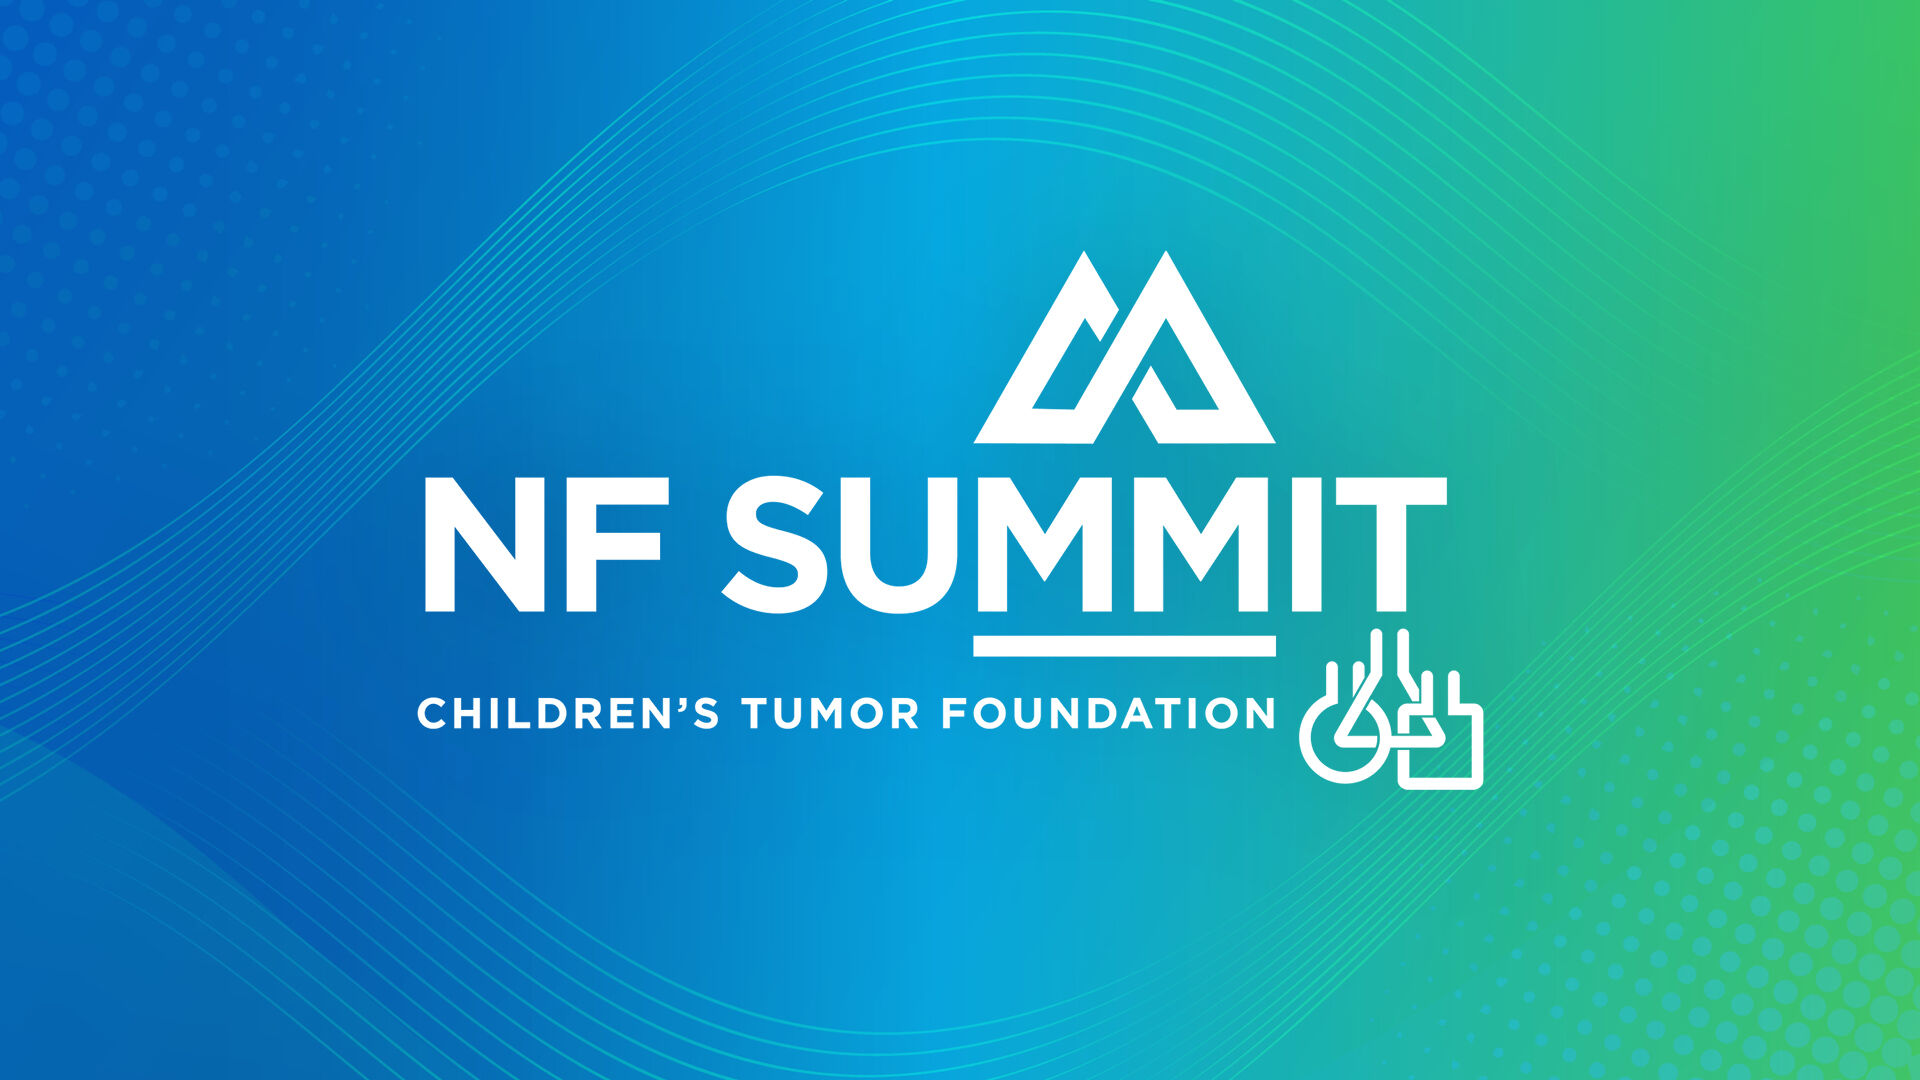 Graphic for "nf summit" featuring the children's tumor foundation logo on a blue and green gradient background.